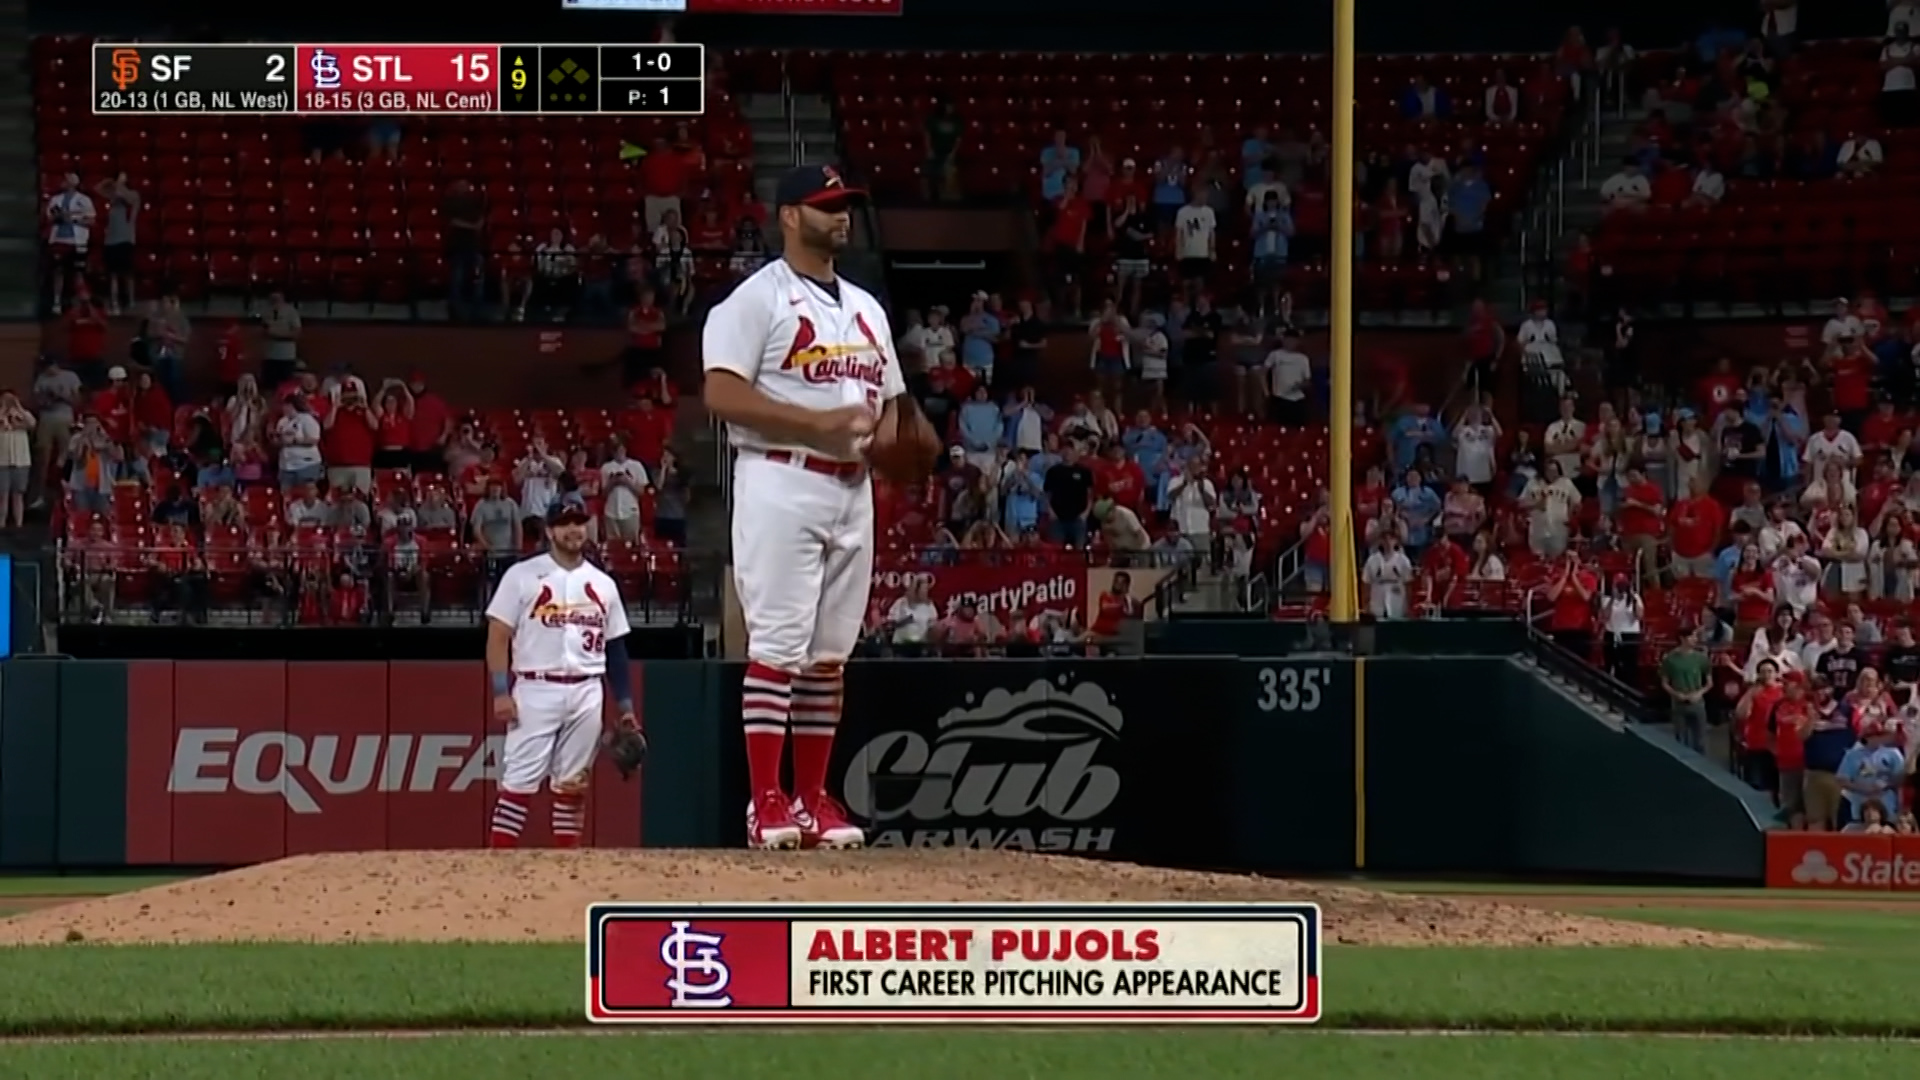 Albert Pujols gives young Cardinals fan the jersey off his back in